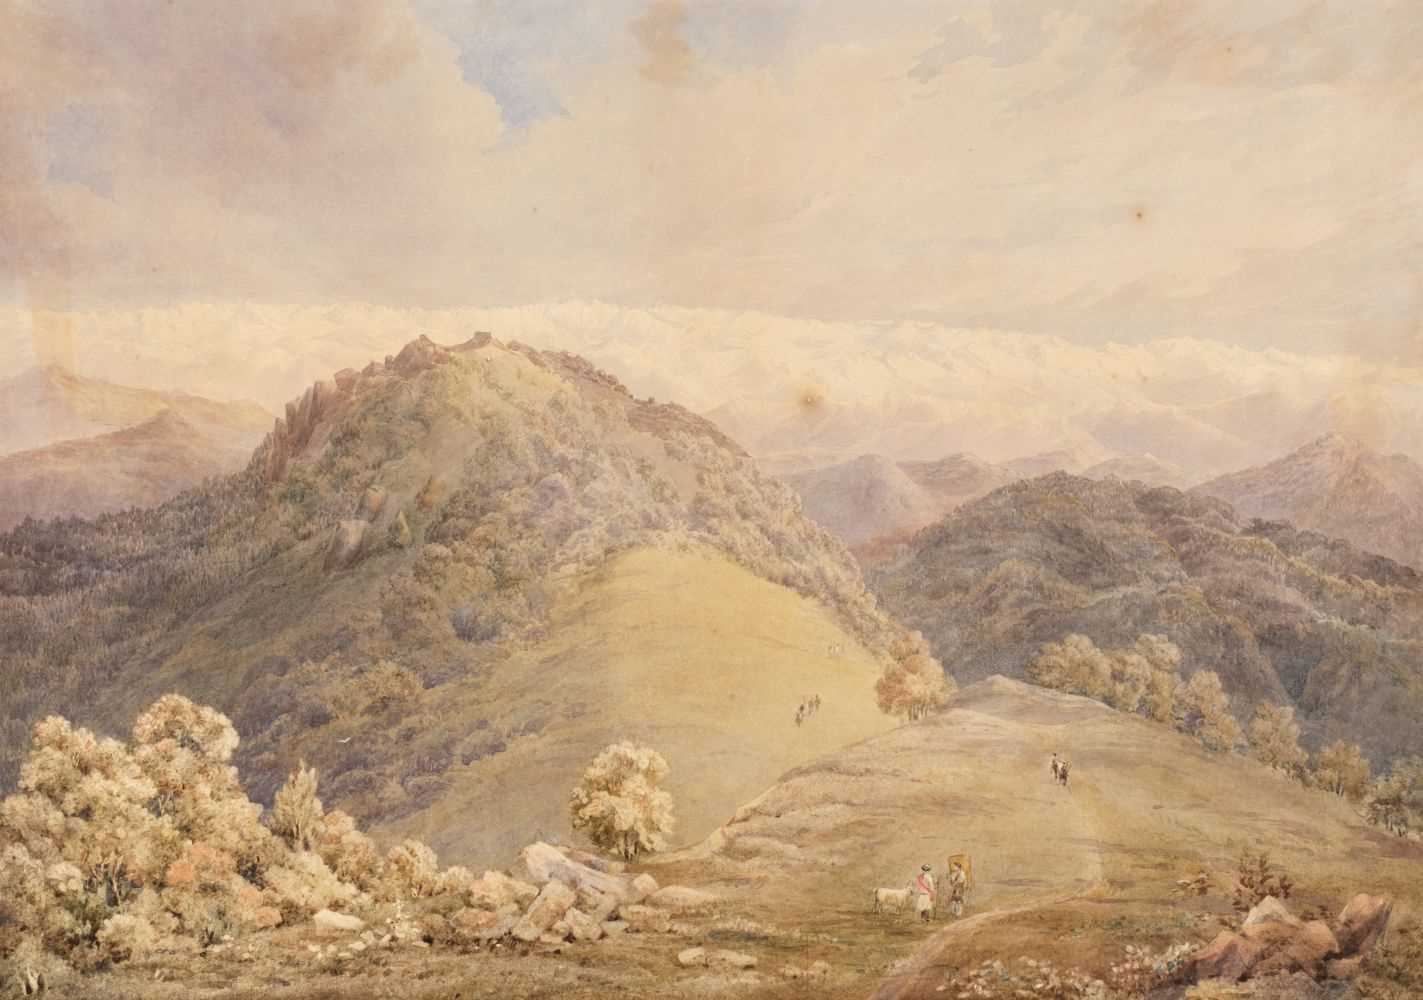 Lot 15 - India. A View in the Himalayas, mid 19th century